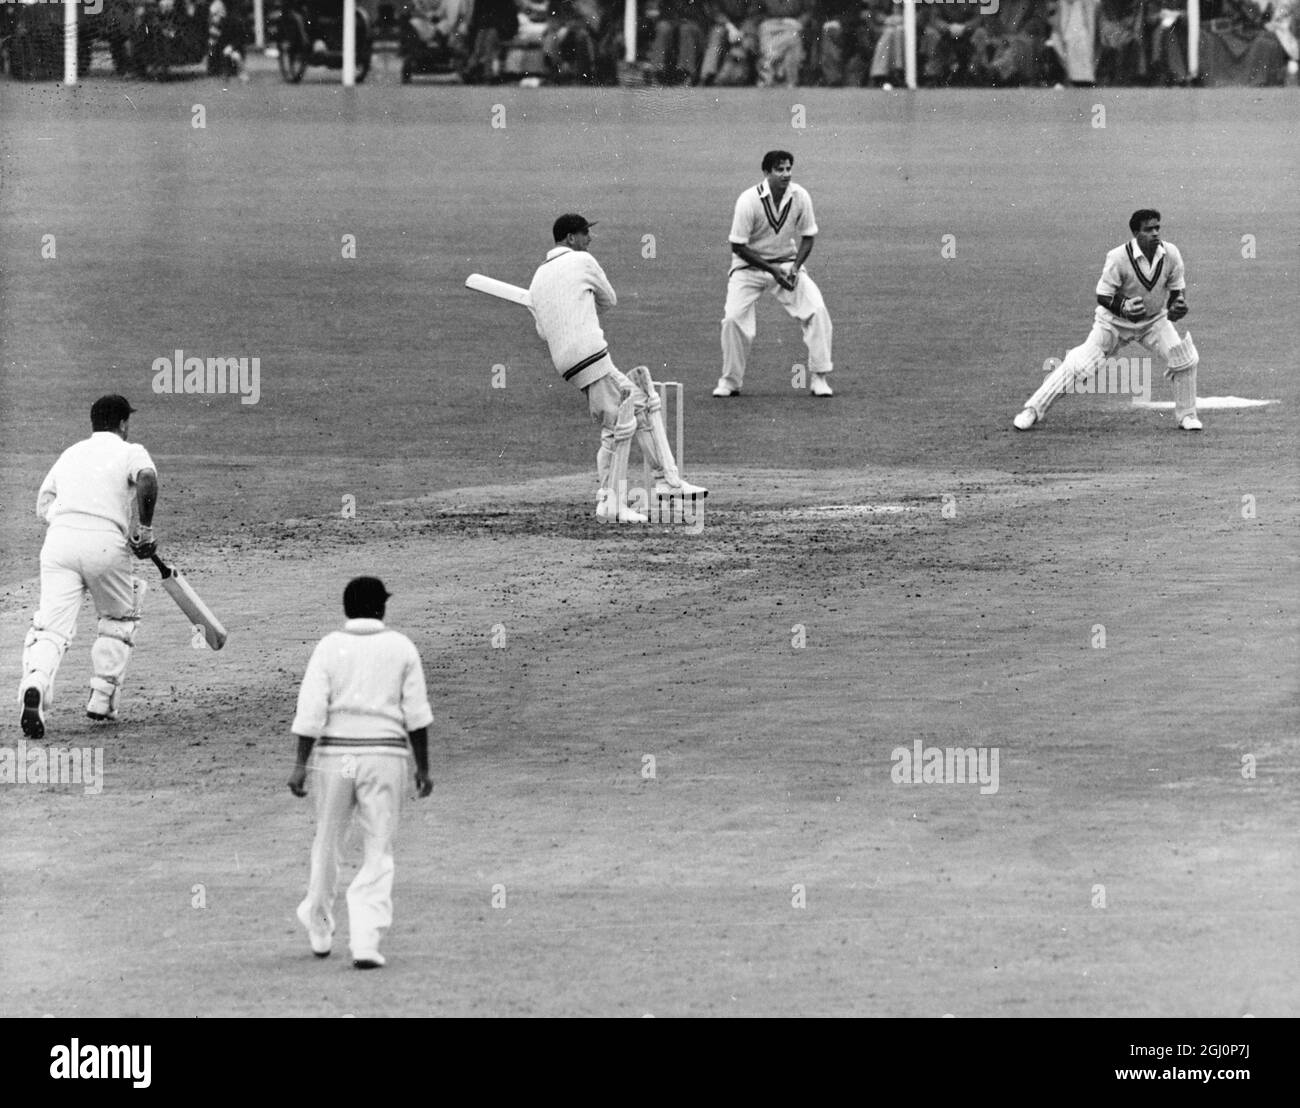 England v Pakistan at Old Trafford . Manchester ; England ' s TW Graveney pulls a ball from Mahmood during the test against Pakistan at Old Trafford , Manchester . Graveney made 65 before being stumped by Imtiaz Ahmed , bowled Shujauddin . 23 July 1954 Stock Photo